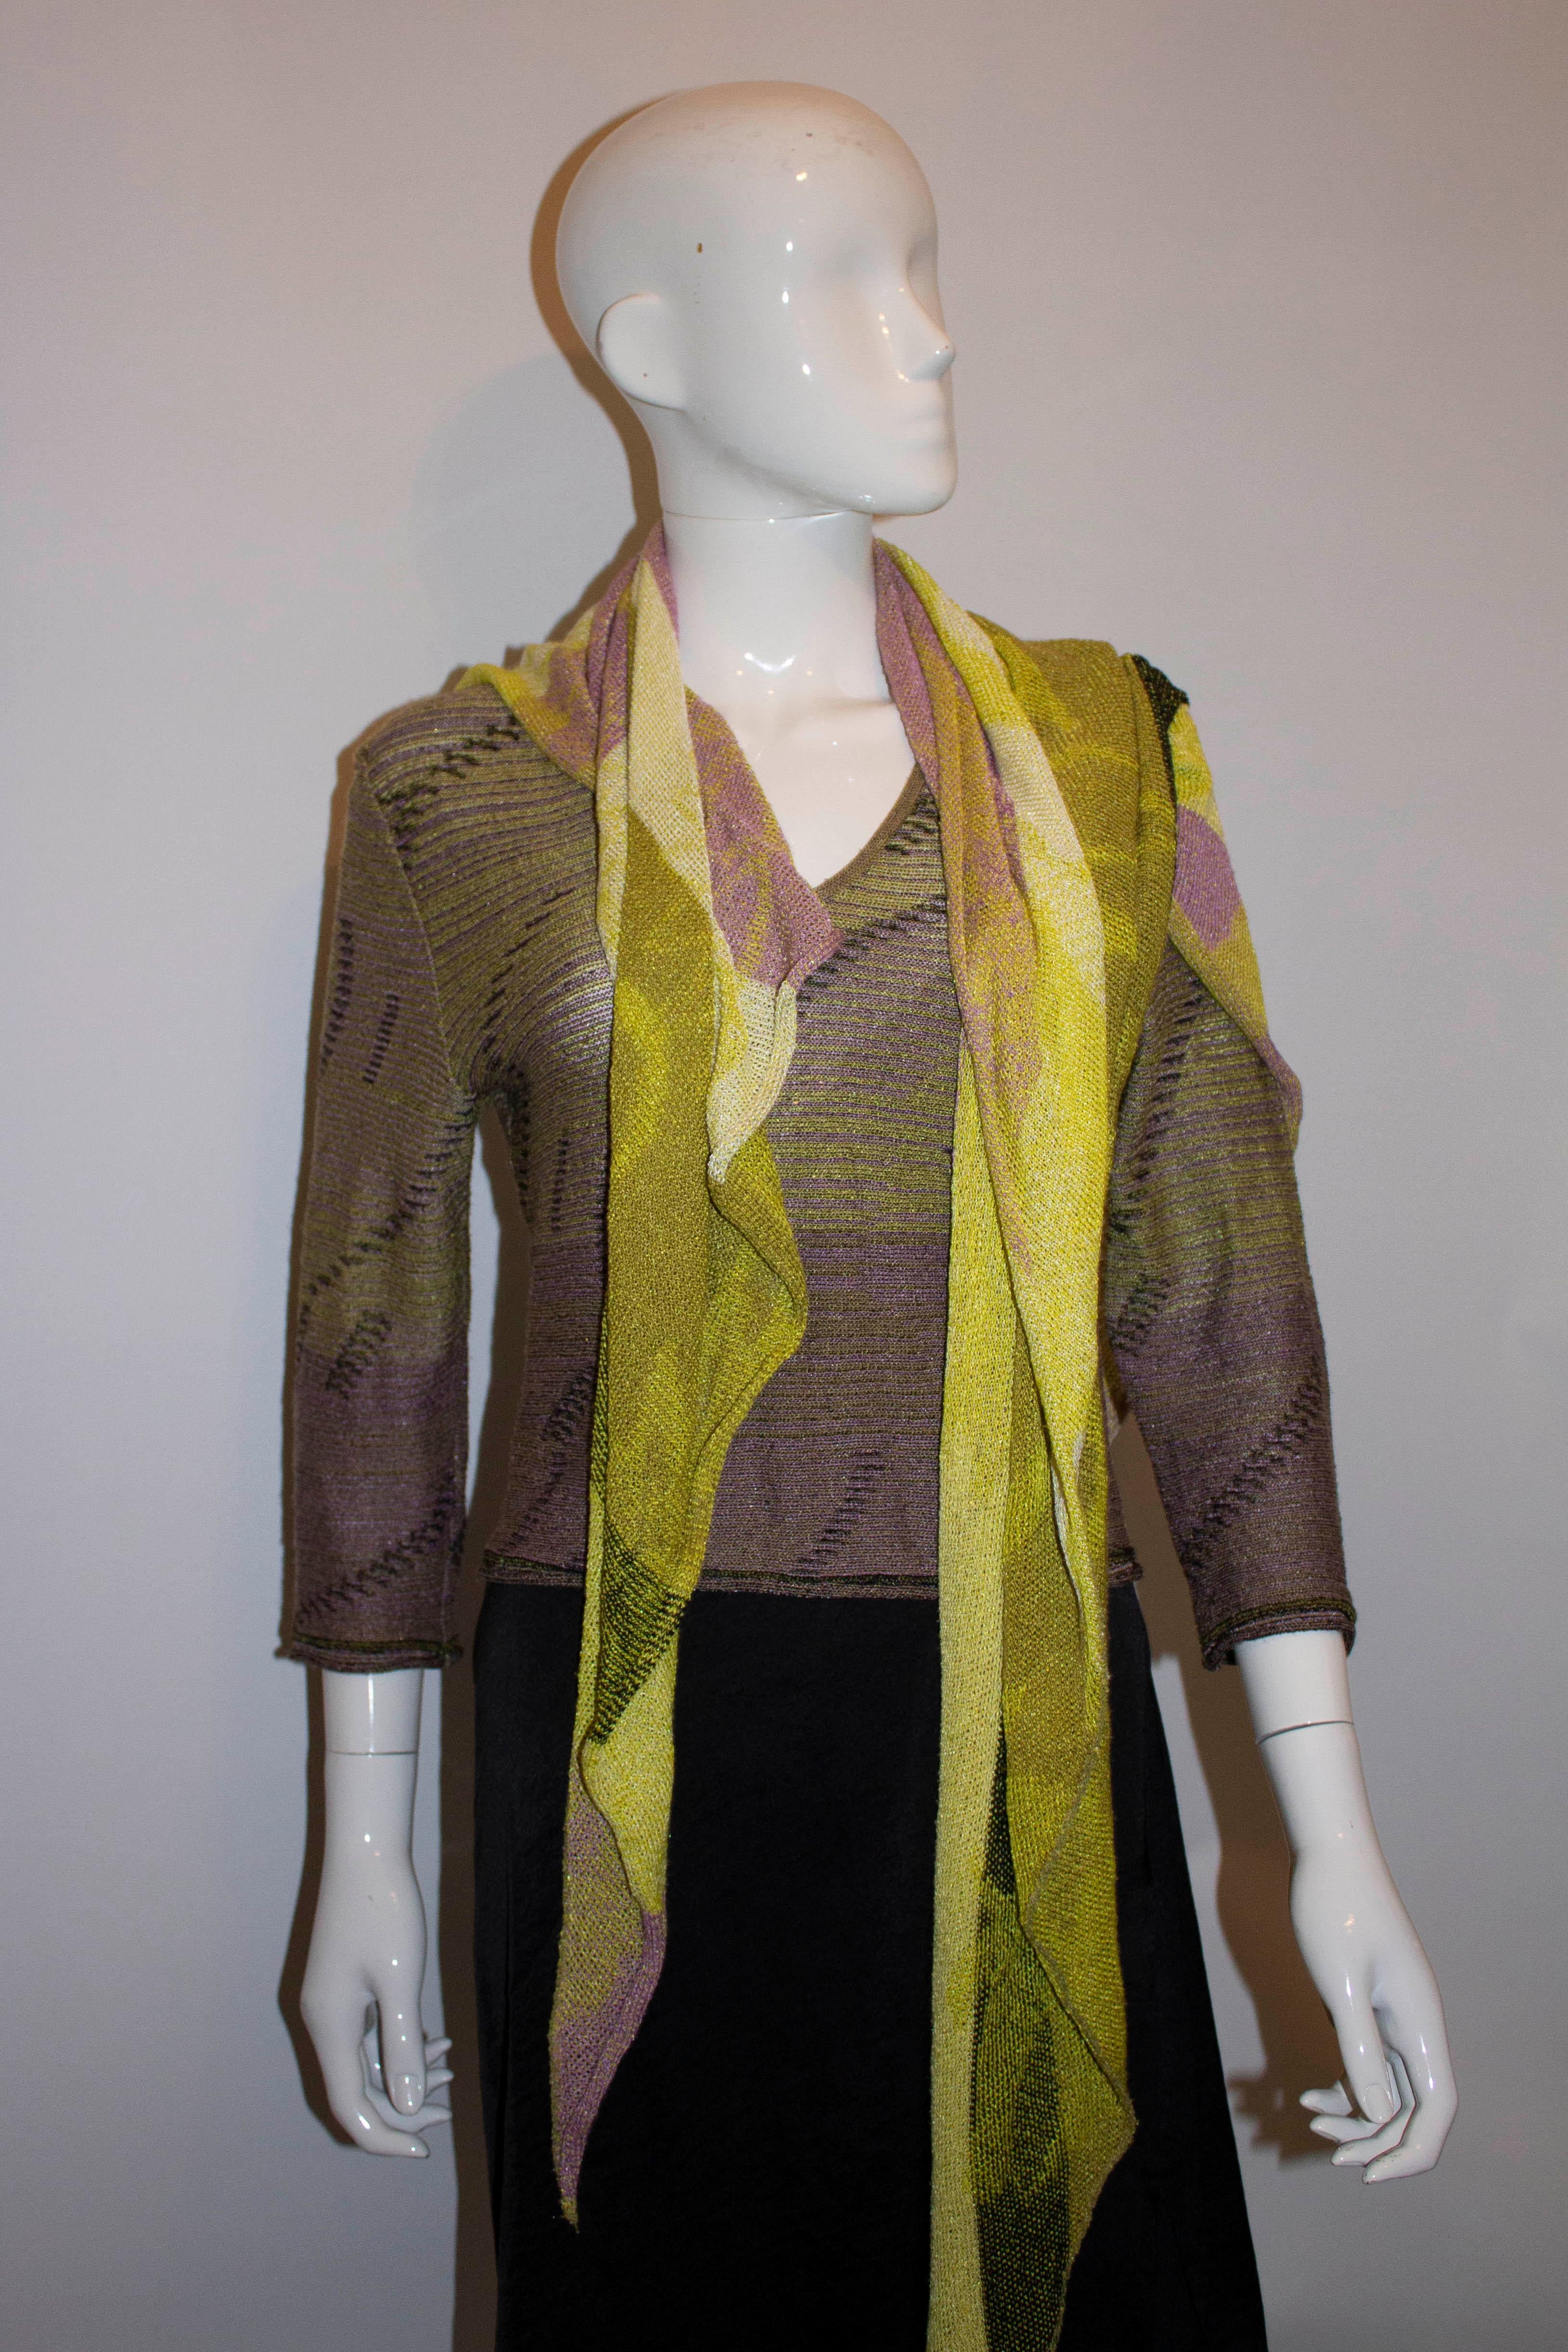 A pretty v neck jumper and matching scarf in  a pretty yellow and purple mix. 
Measurements:  Jumper  Bust 35'' , length 23'' Scarf  Measurements 96'' x 83'' x 80''